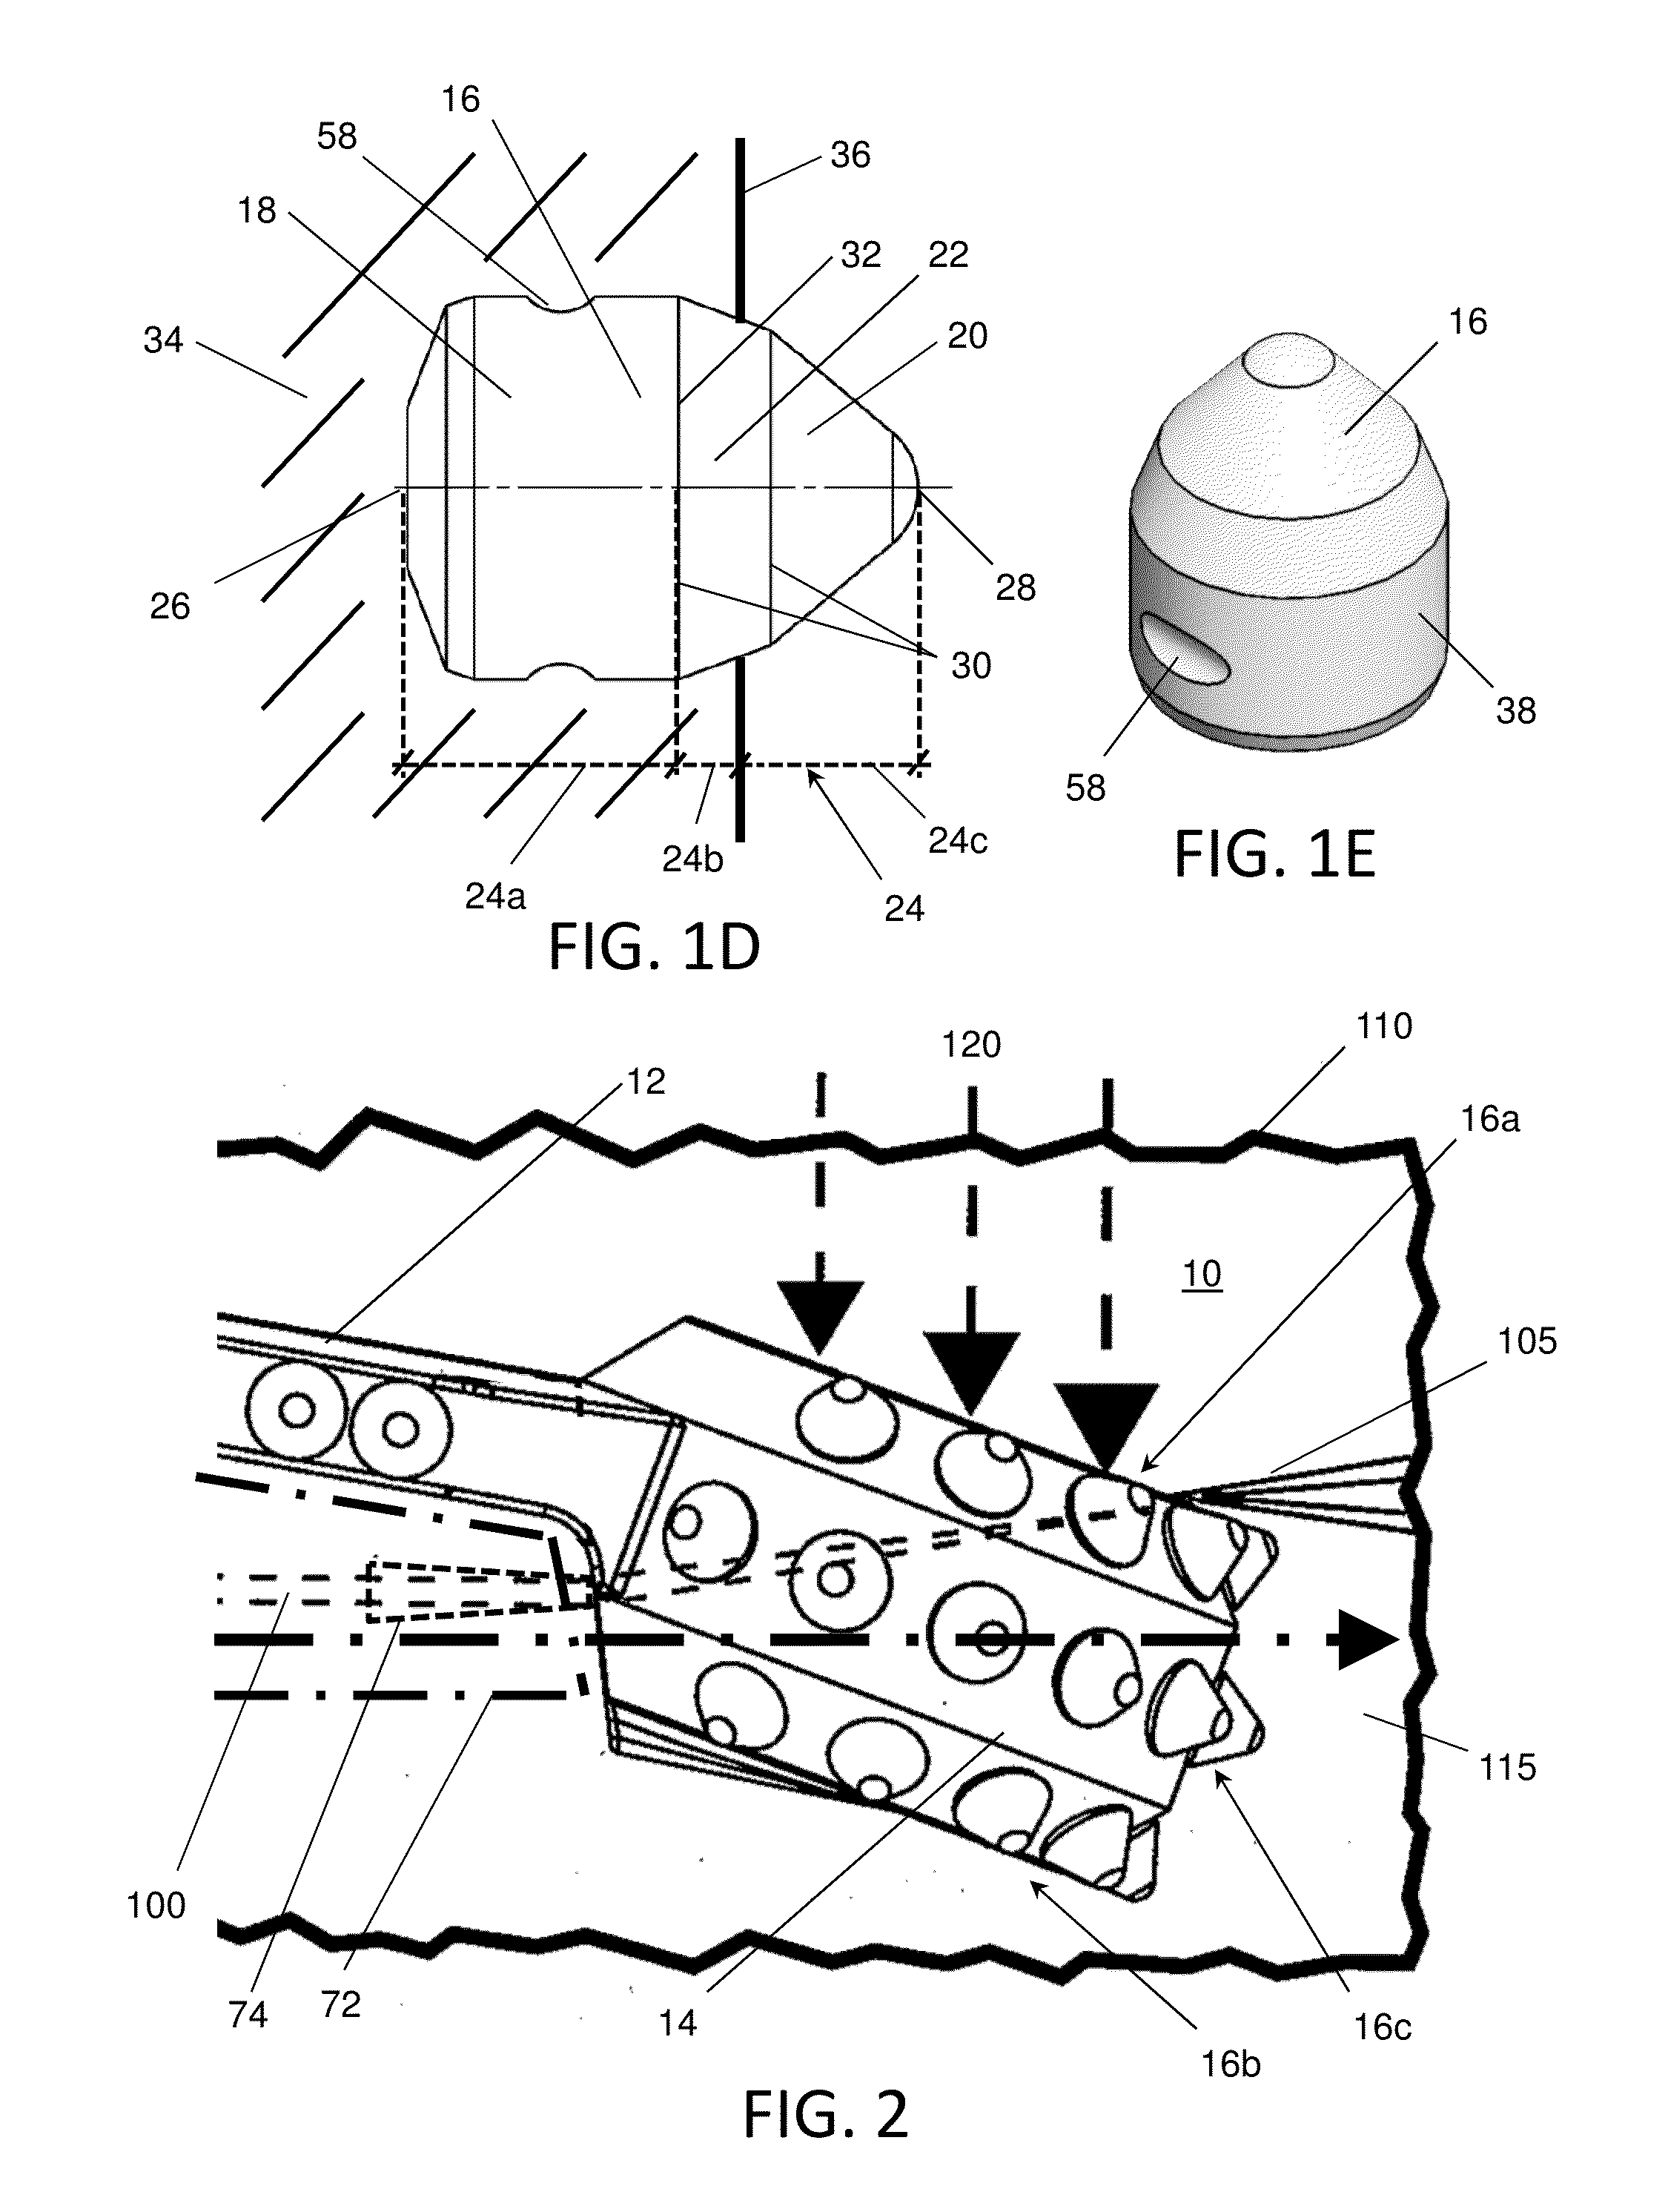 Boring bit and method of manufacture